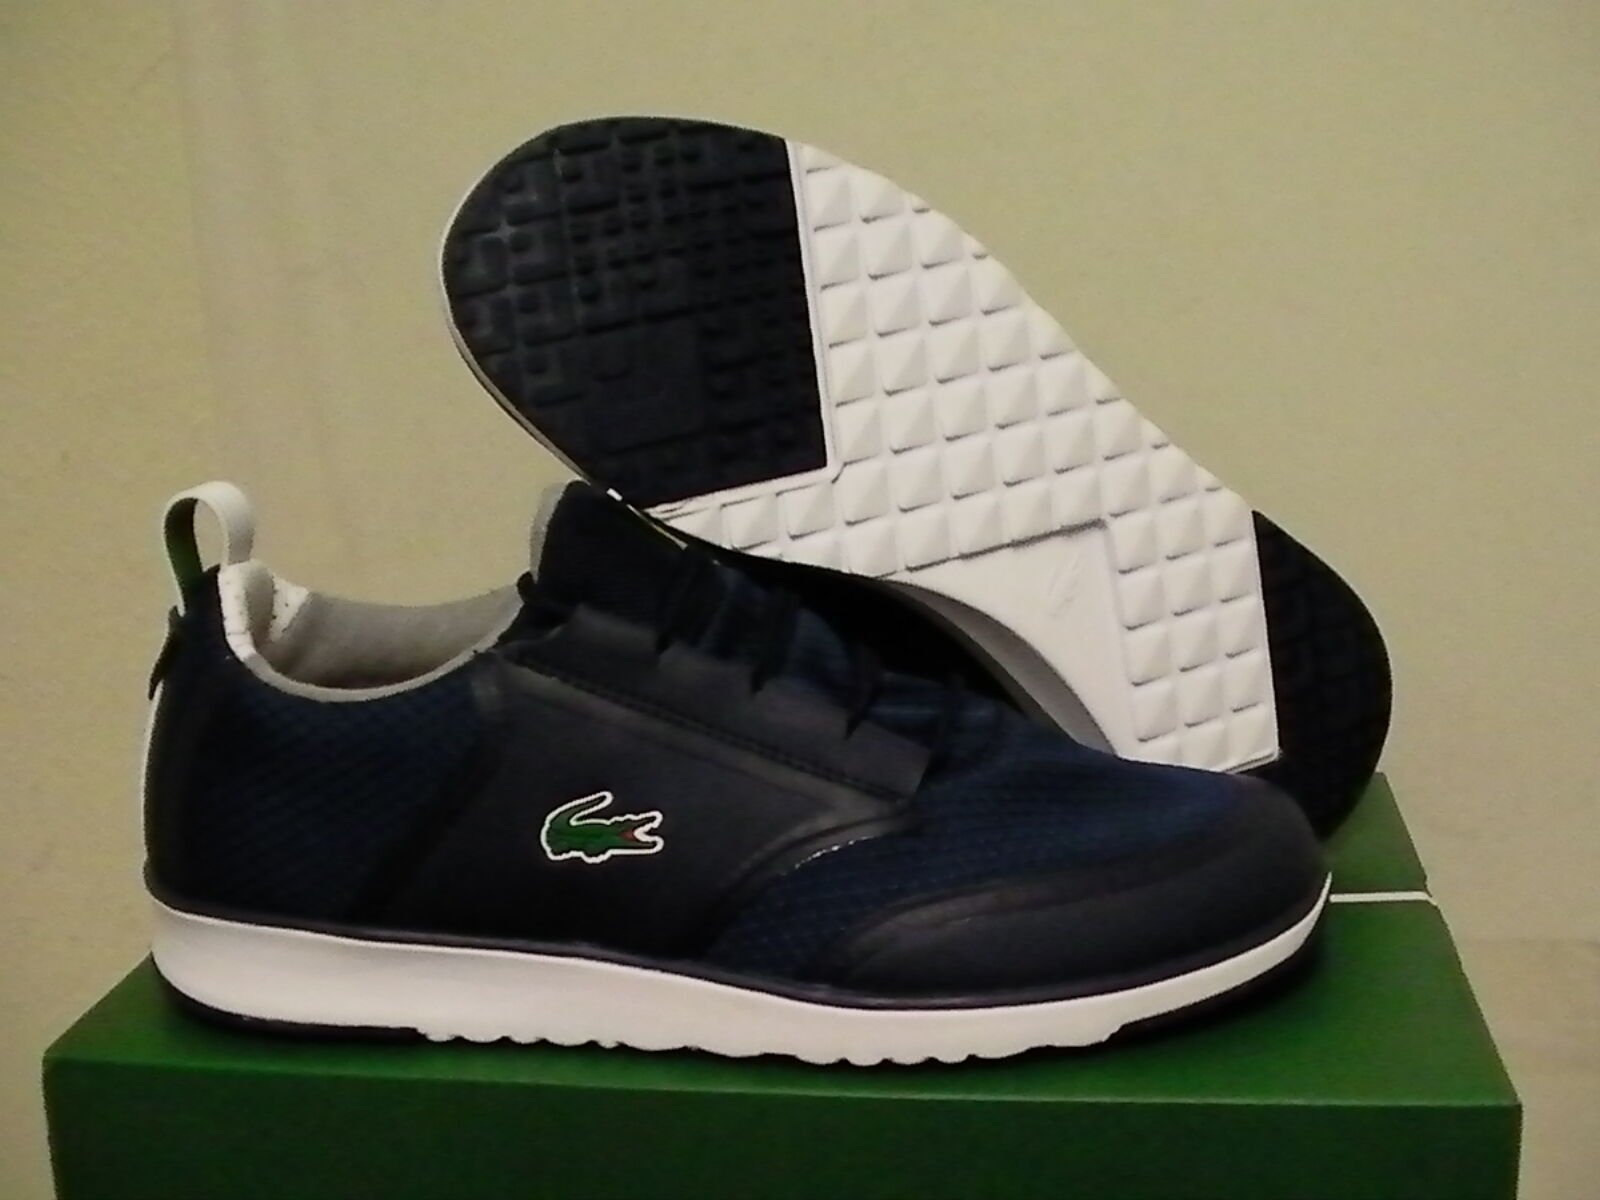 Lacoste shoes L.IGHT LT12 txt/syn and 50 similar